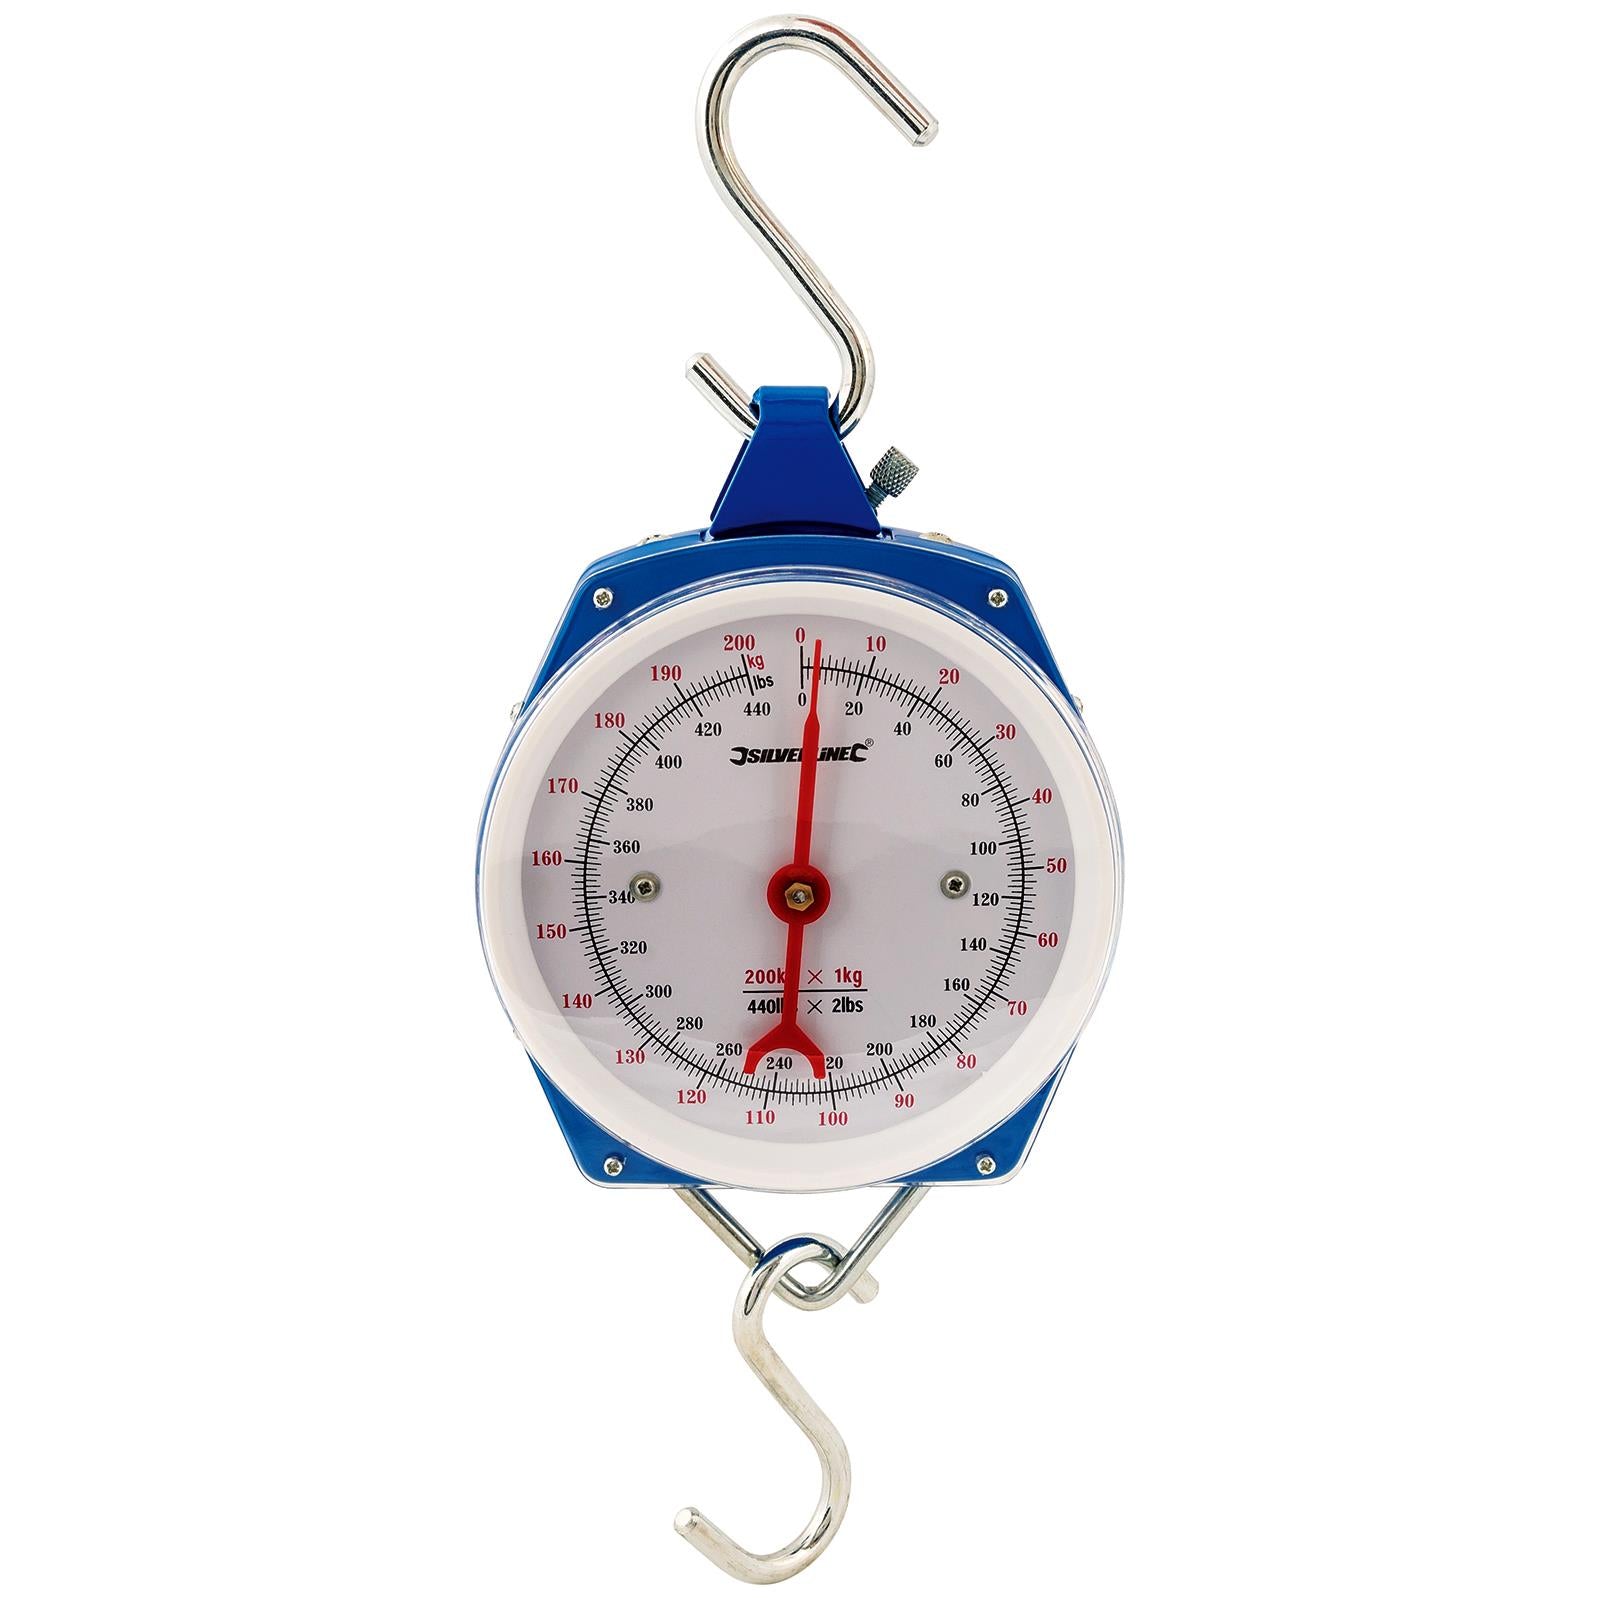 Silverline Hanging Scales Heavy Duty 200kg Metric and Imperial Rigid Hook Fishing